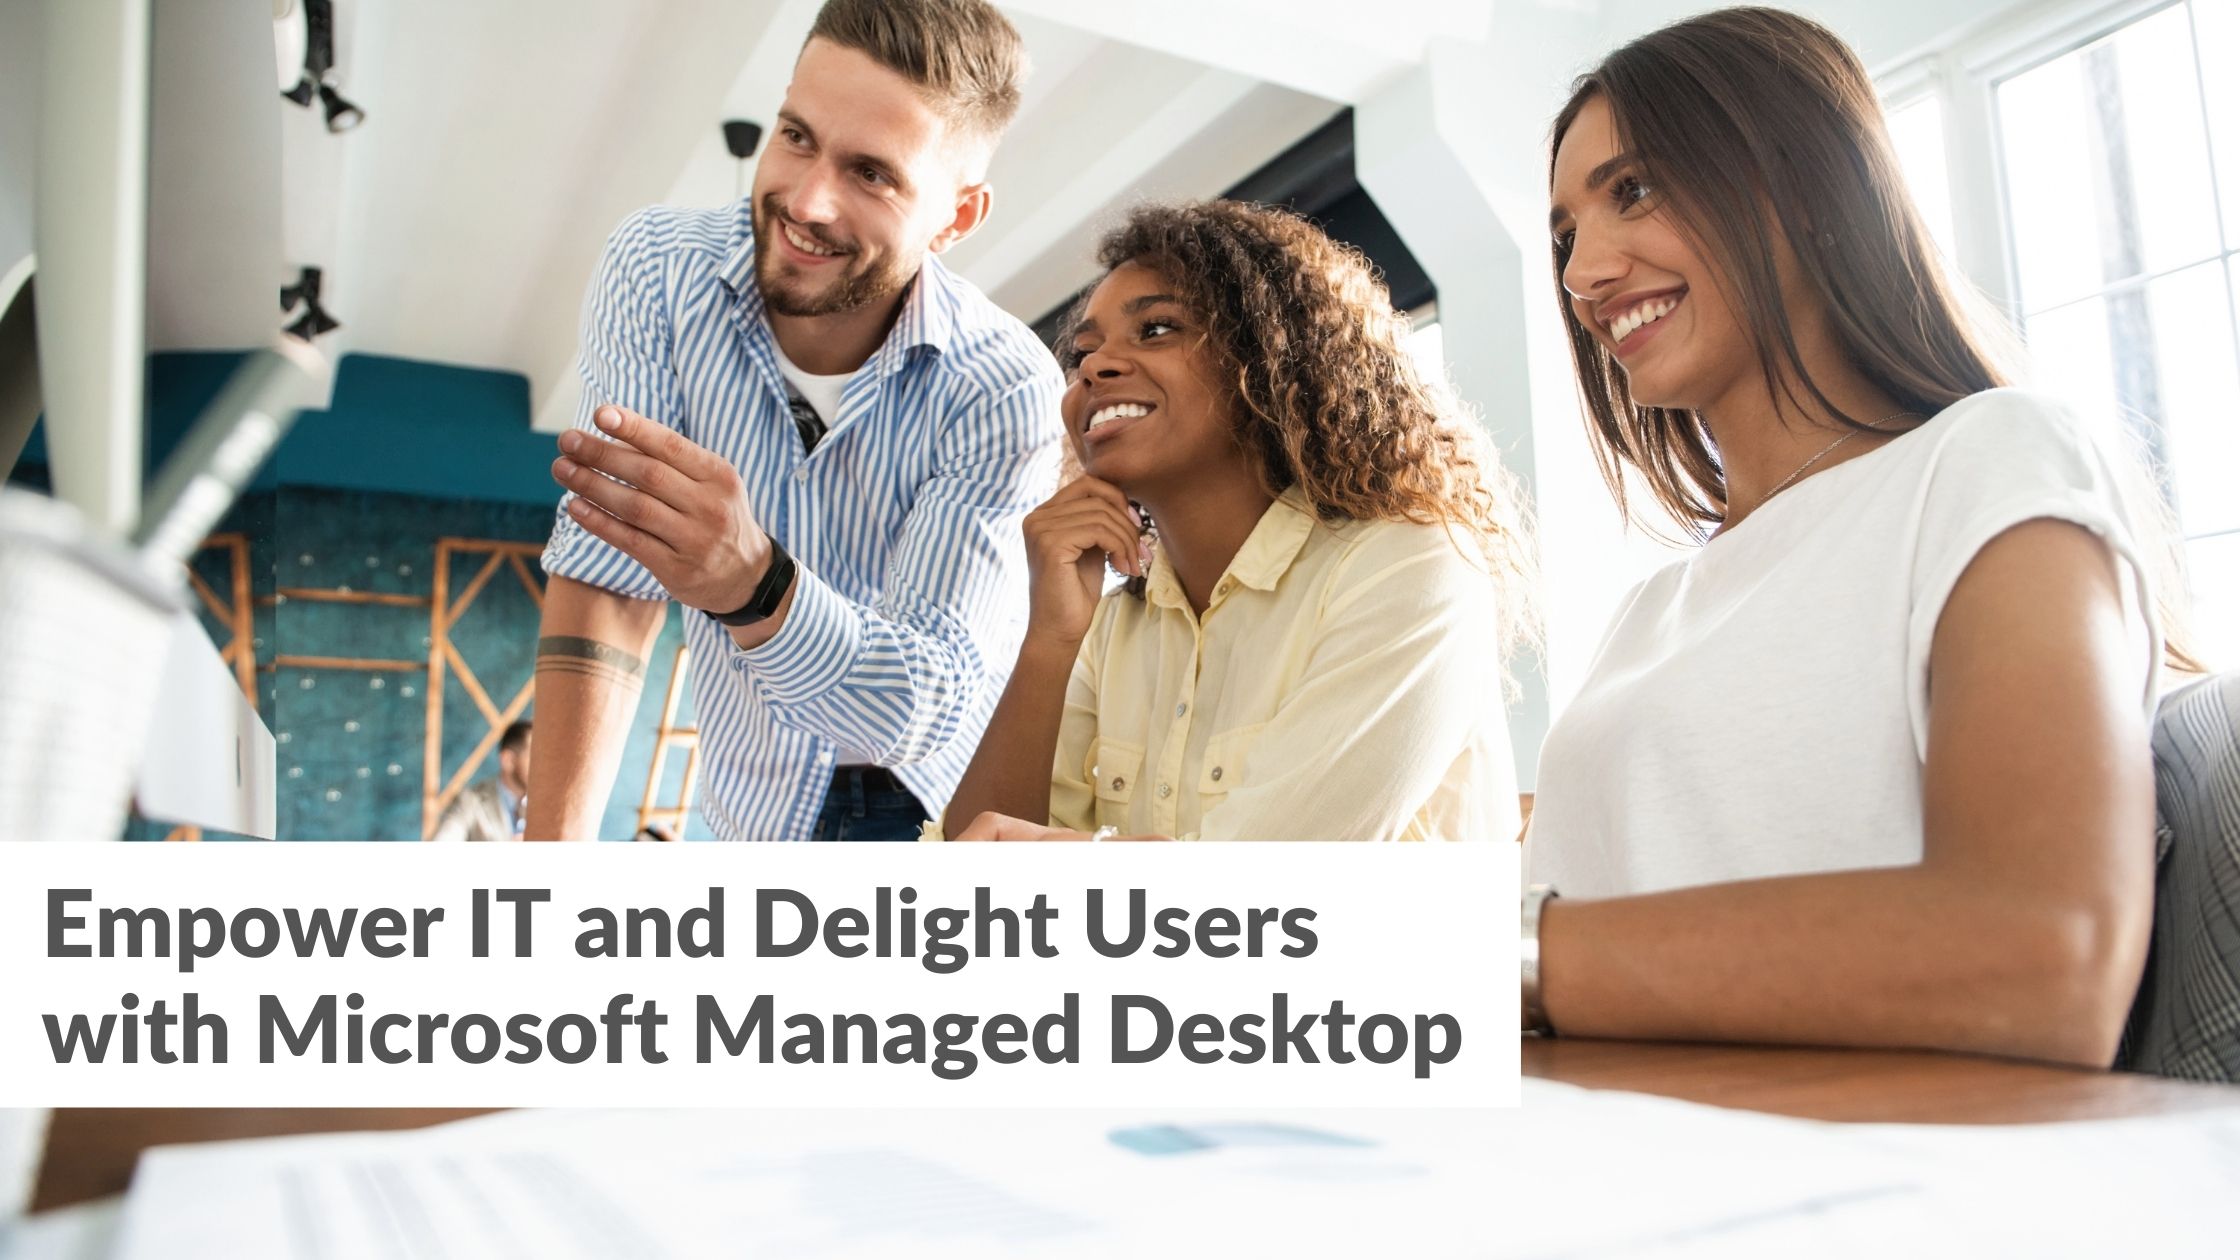 Empower IT and Delight Users with Microsoft Managed Desktop